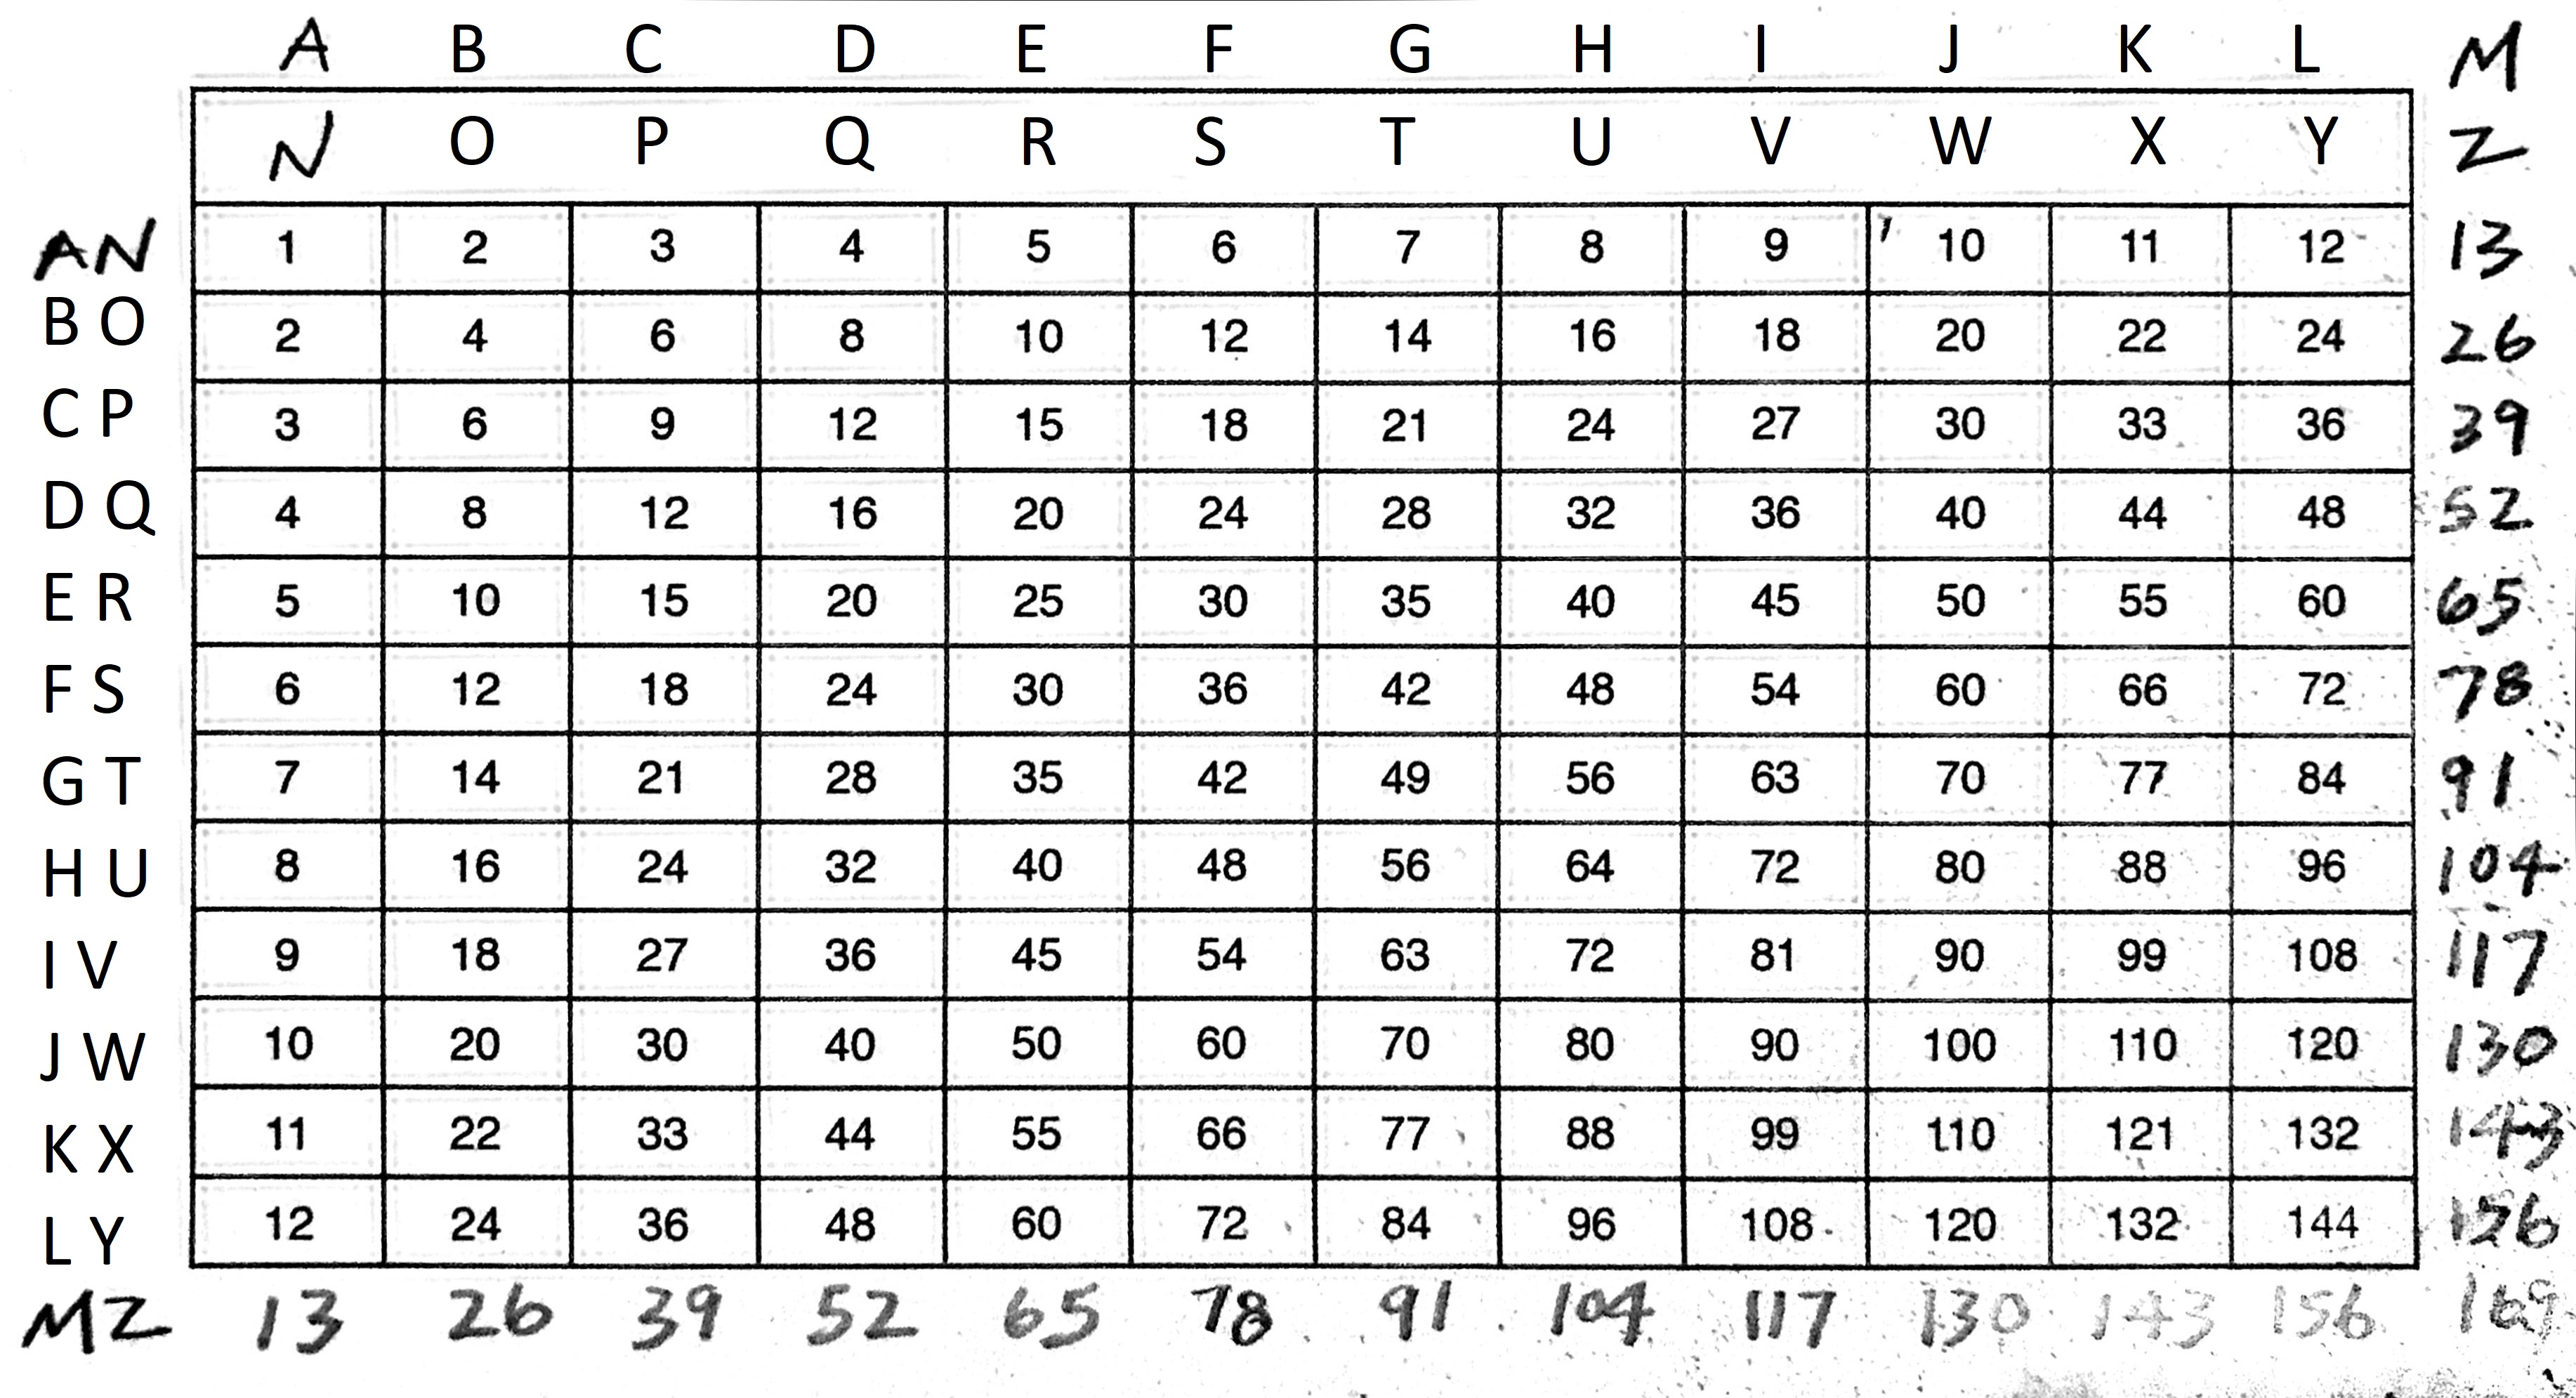 multiplication-table-annotated